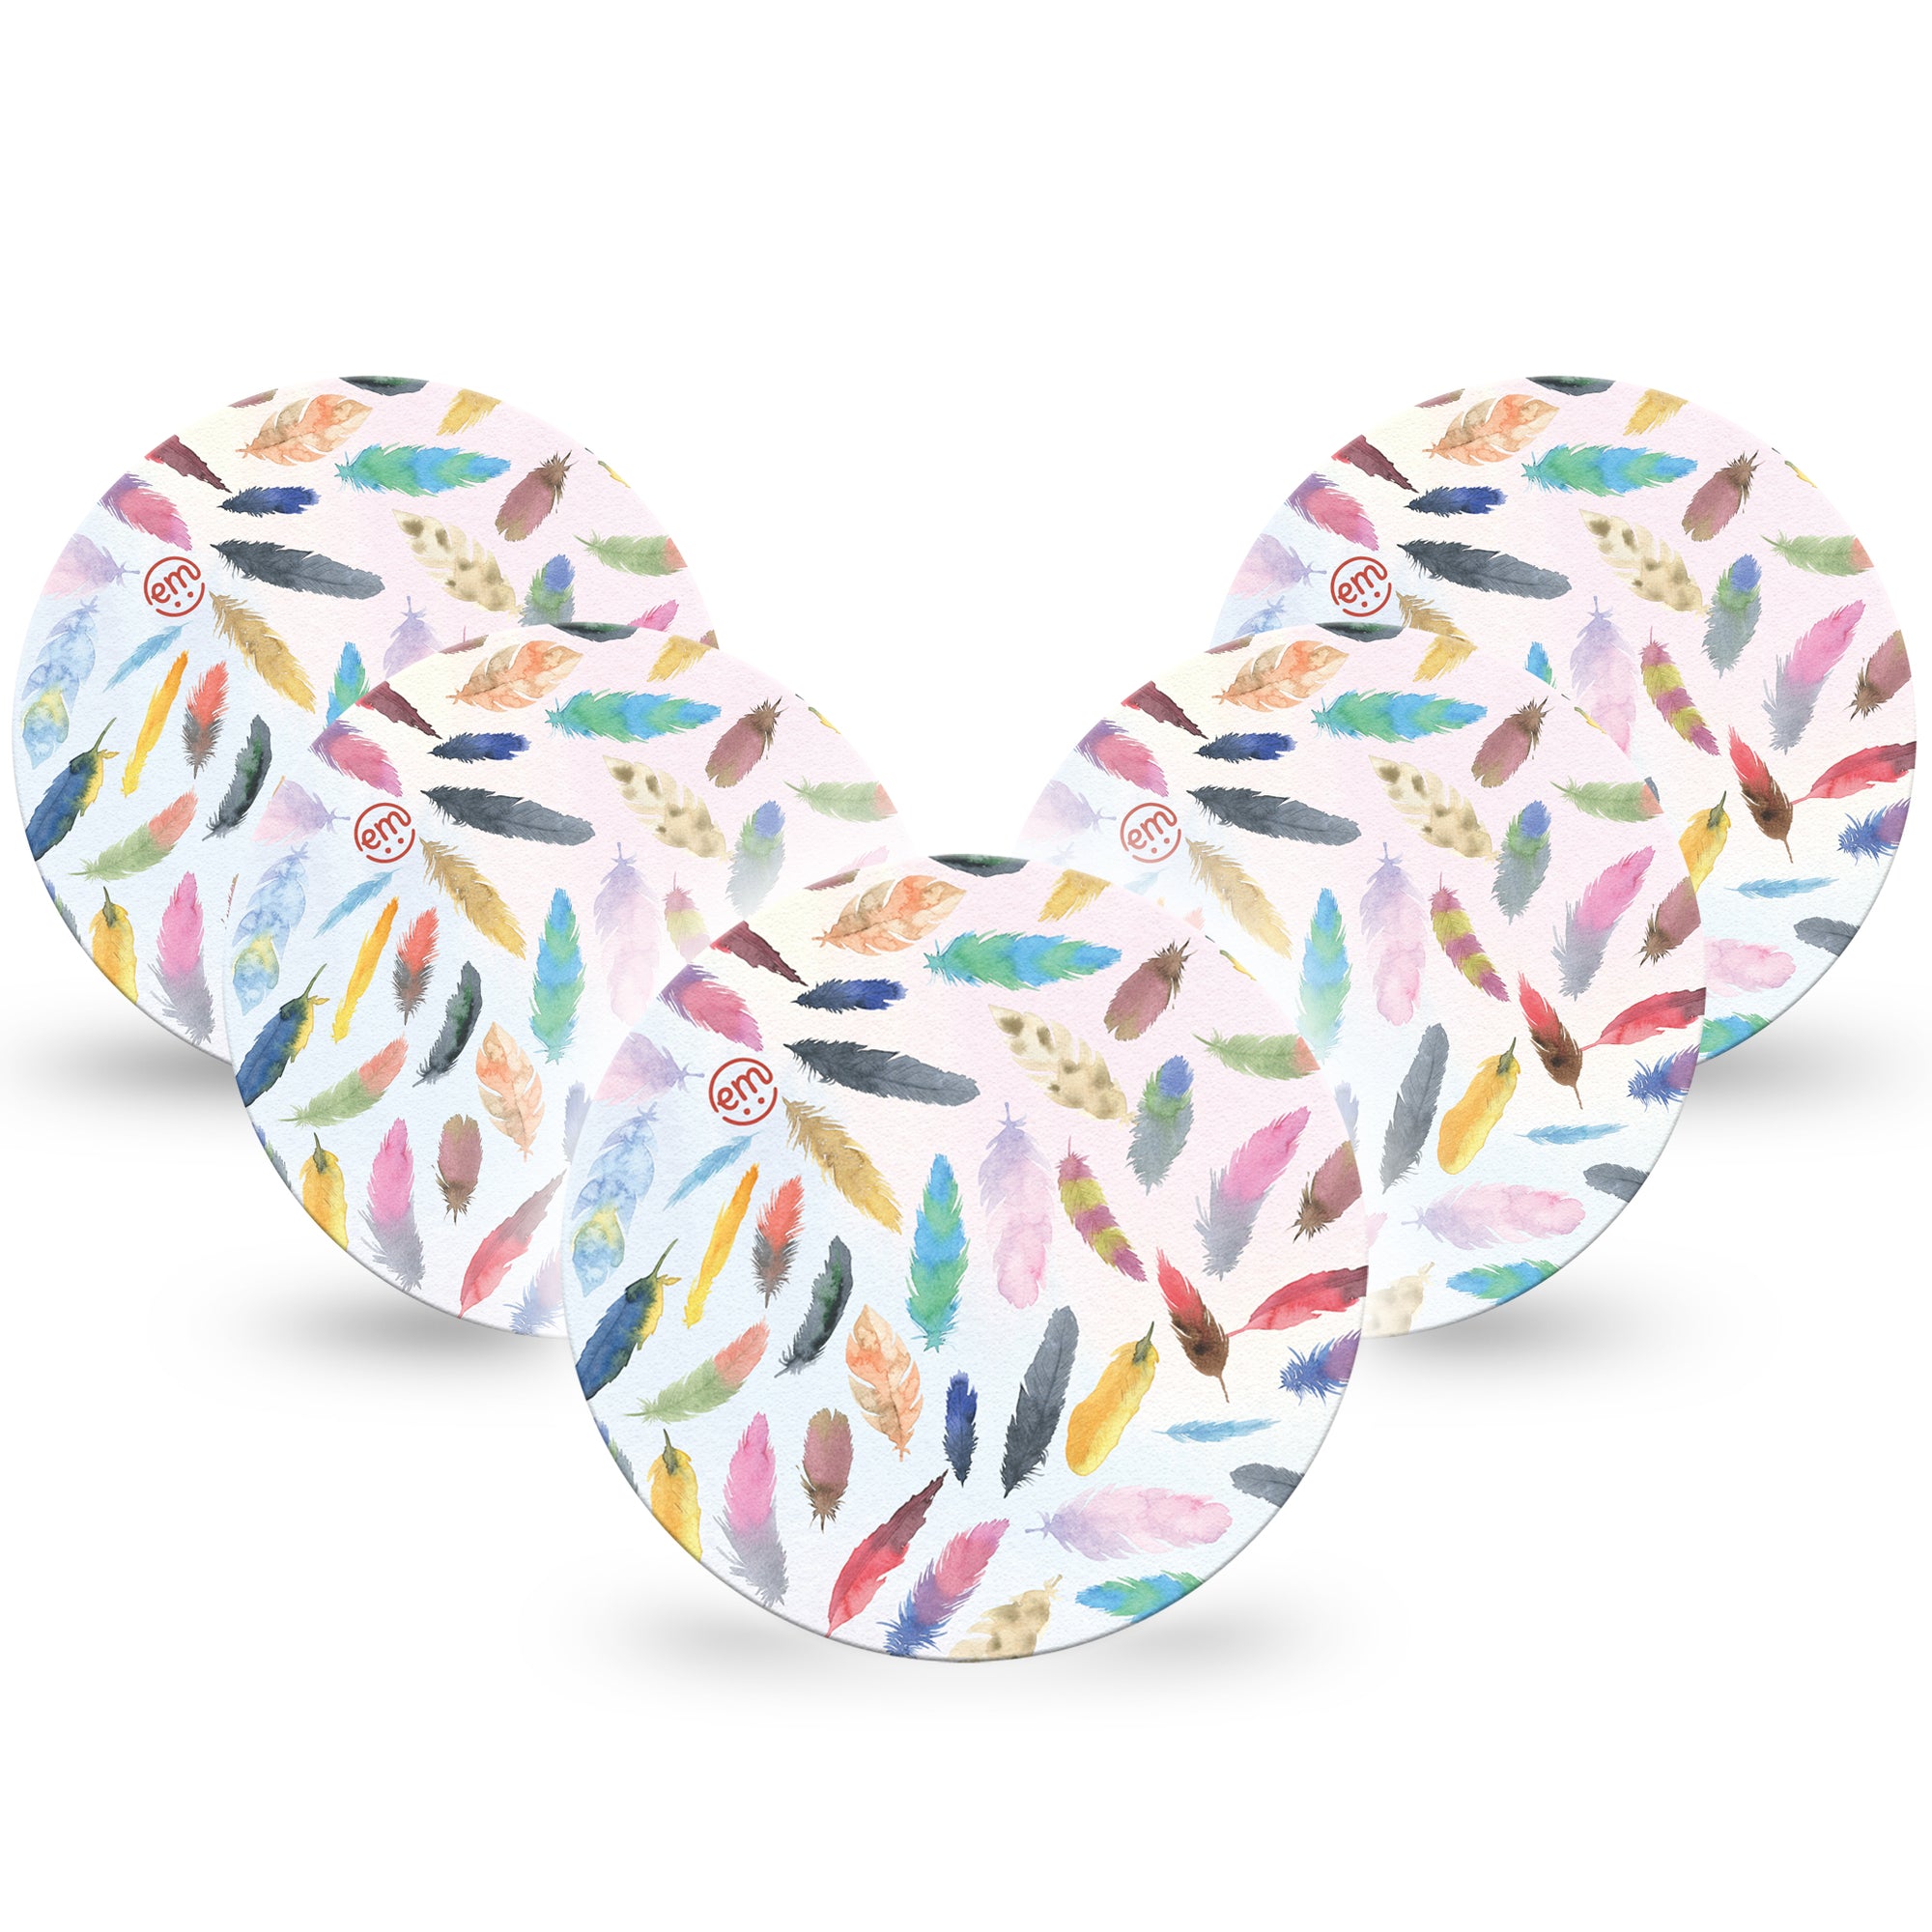 ExpressionMed Feathers Libre Patch Tape Pack